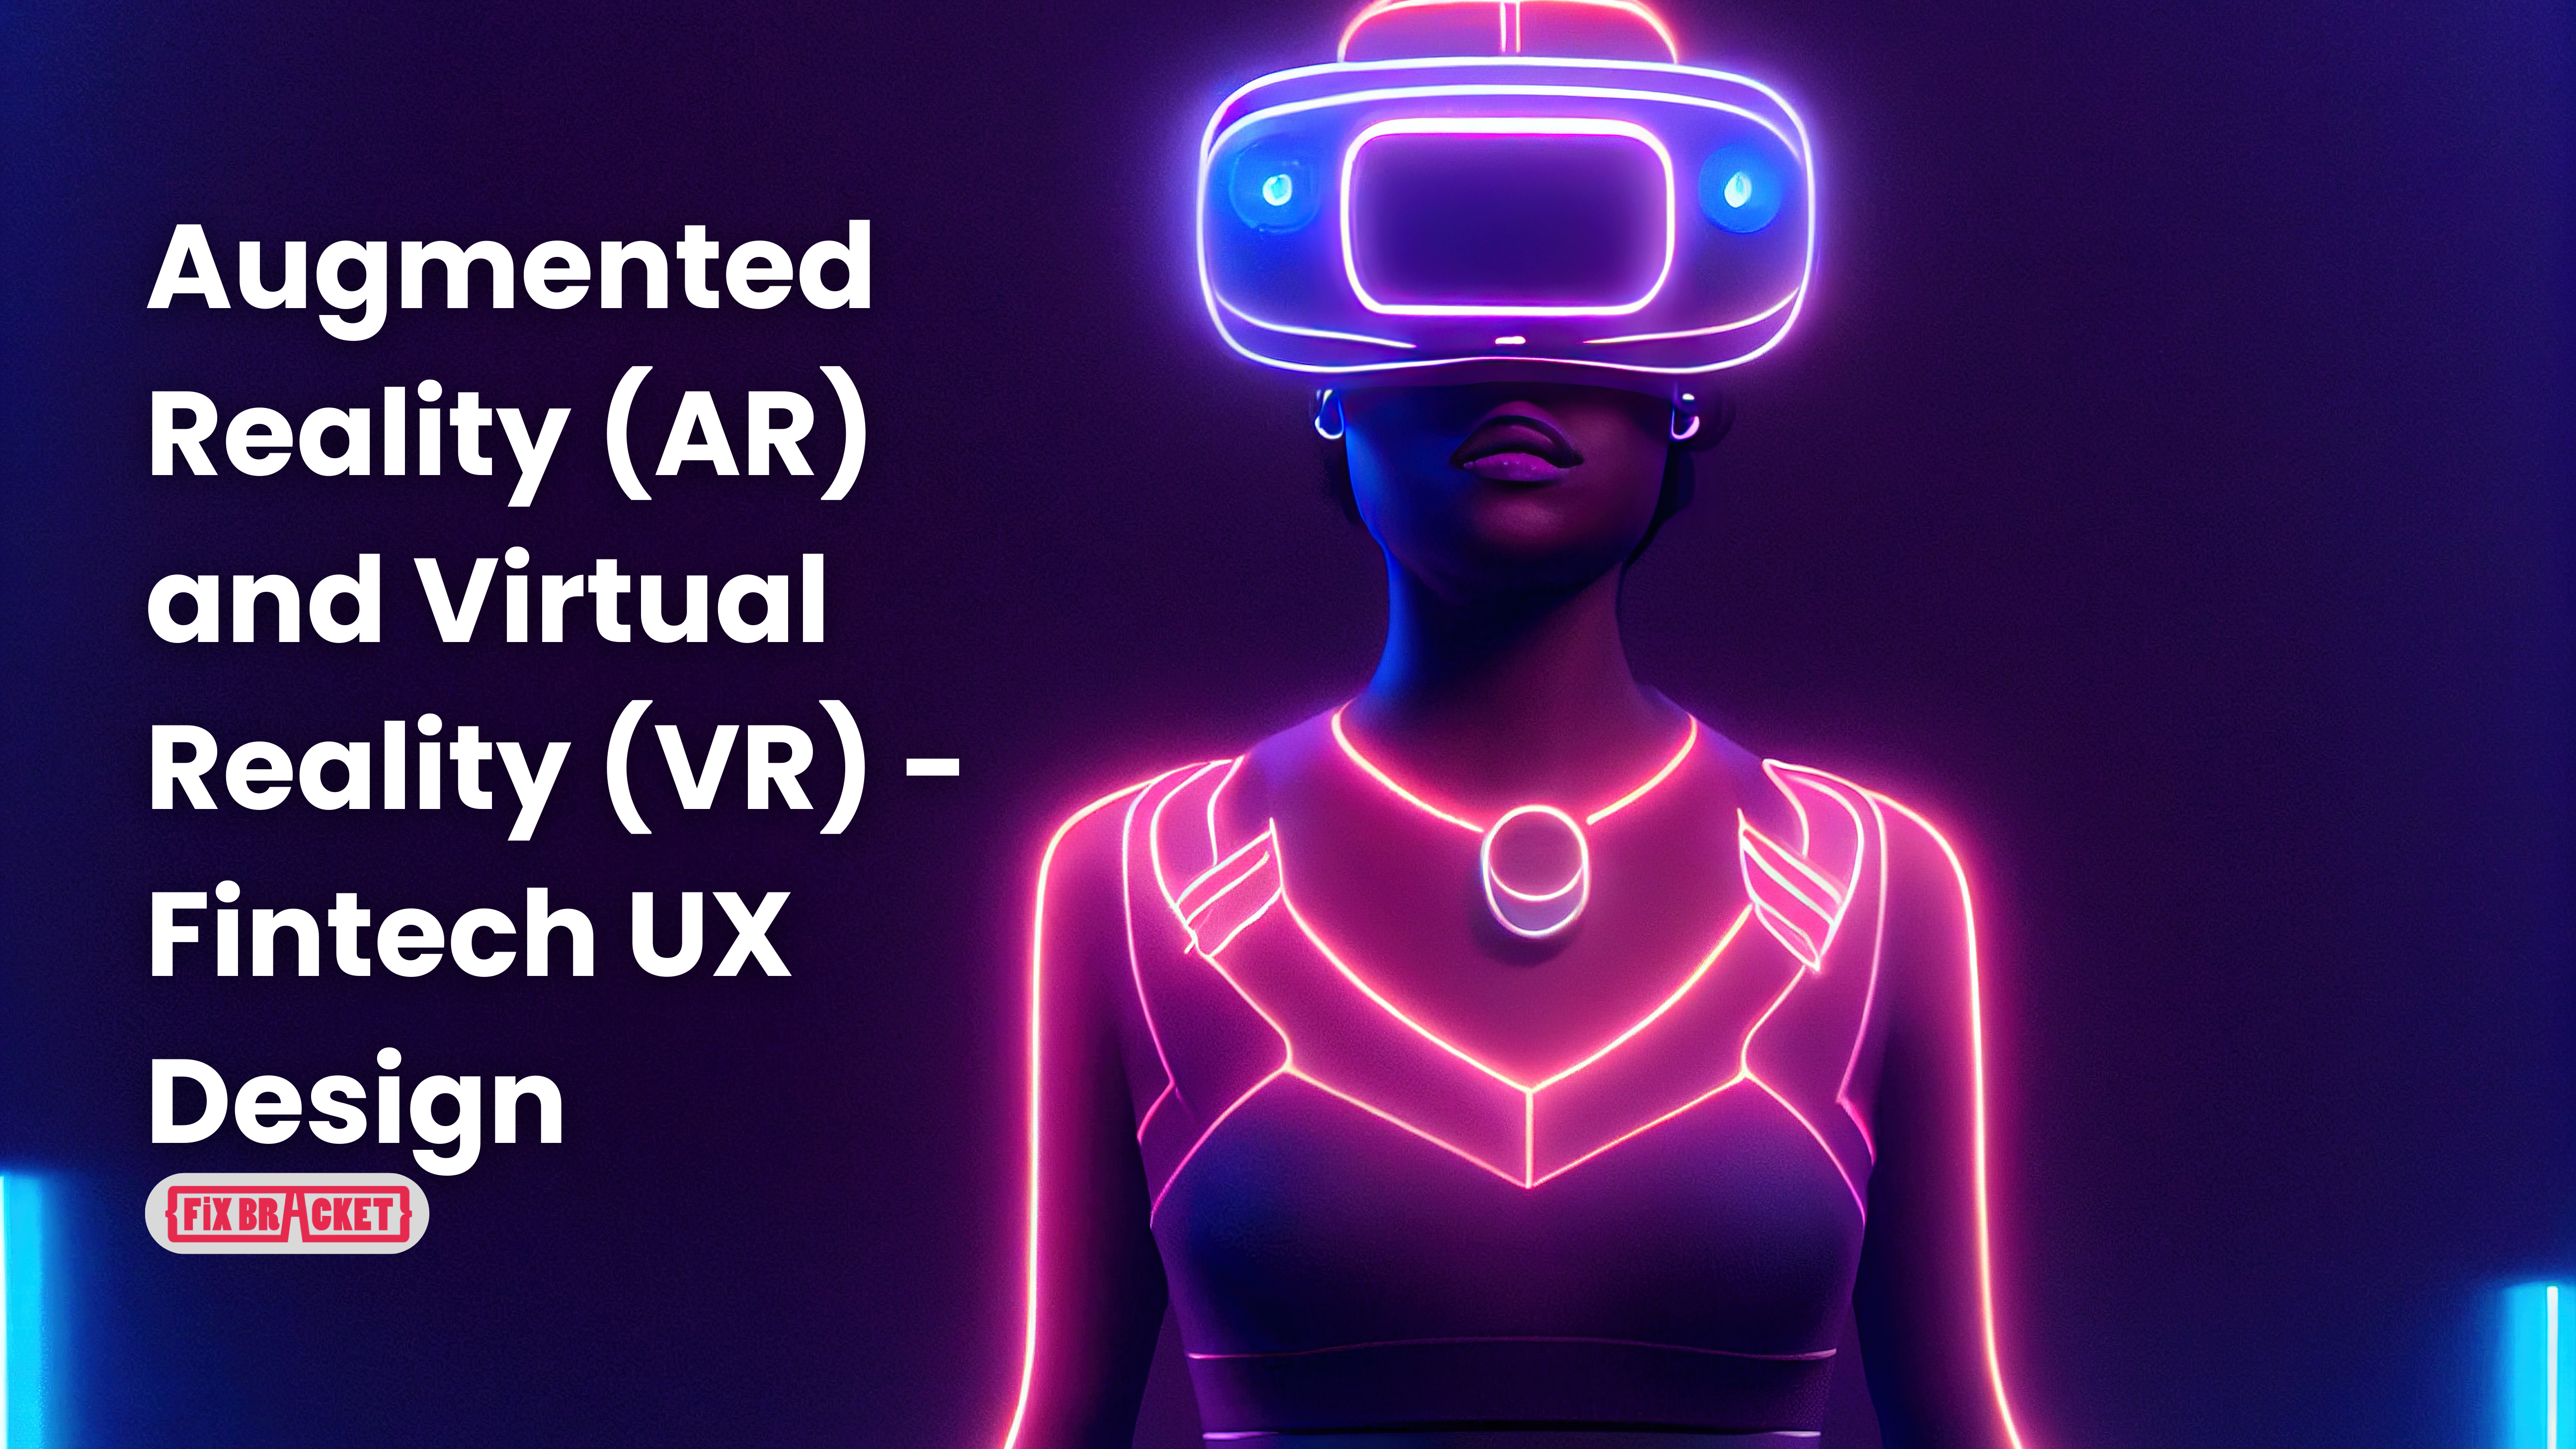 Augmented Reality (AR) and Virtual Reality (VR) - Fintech UX Design